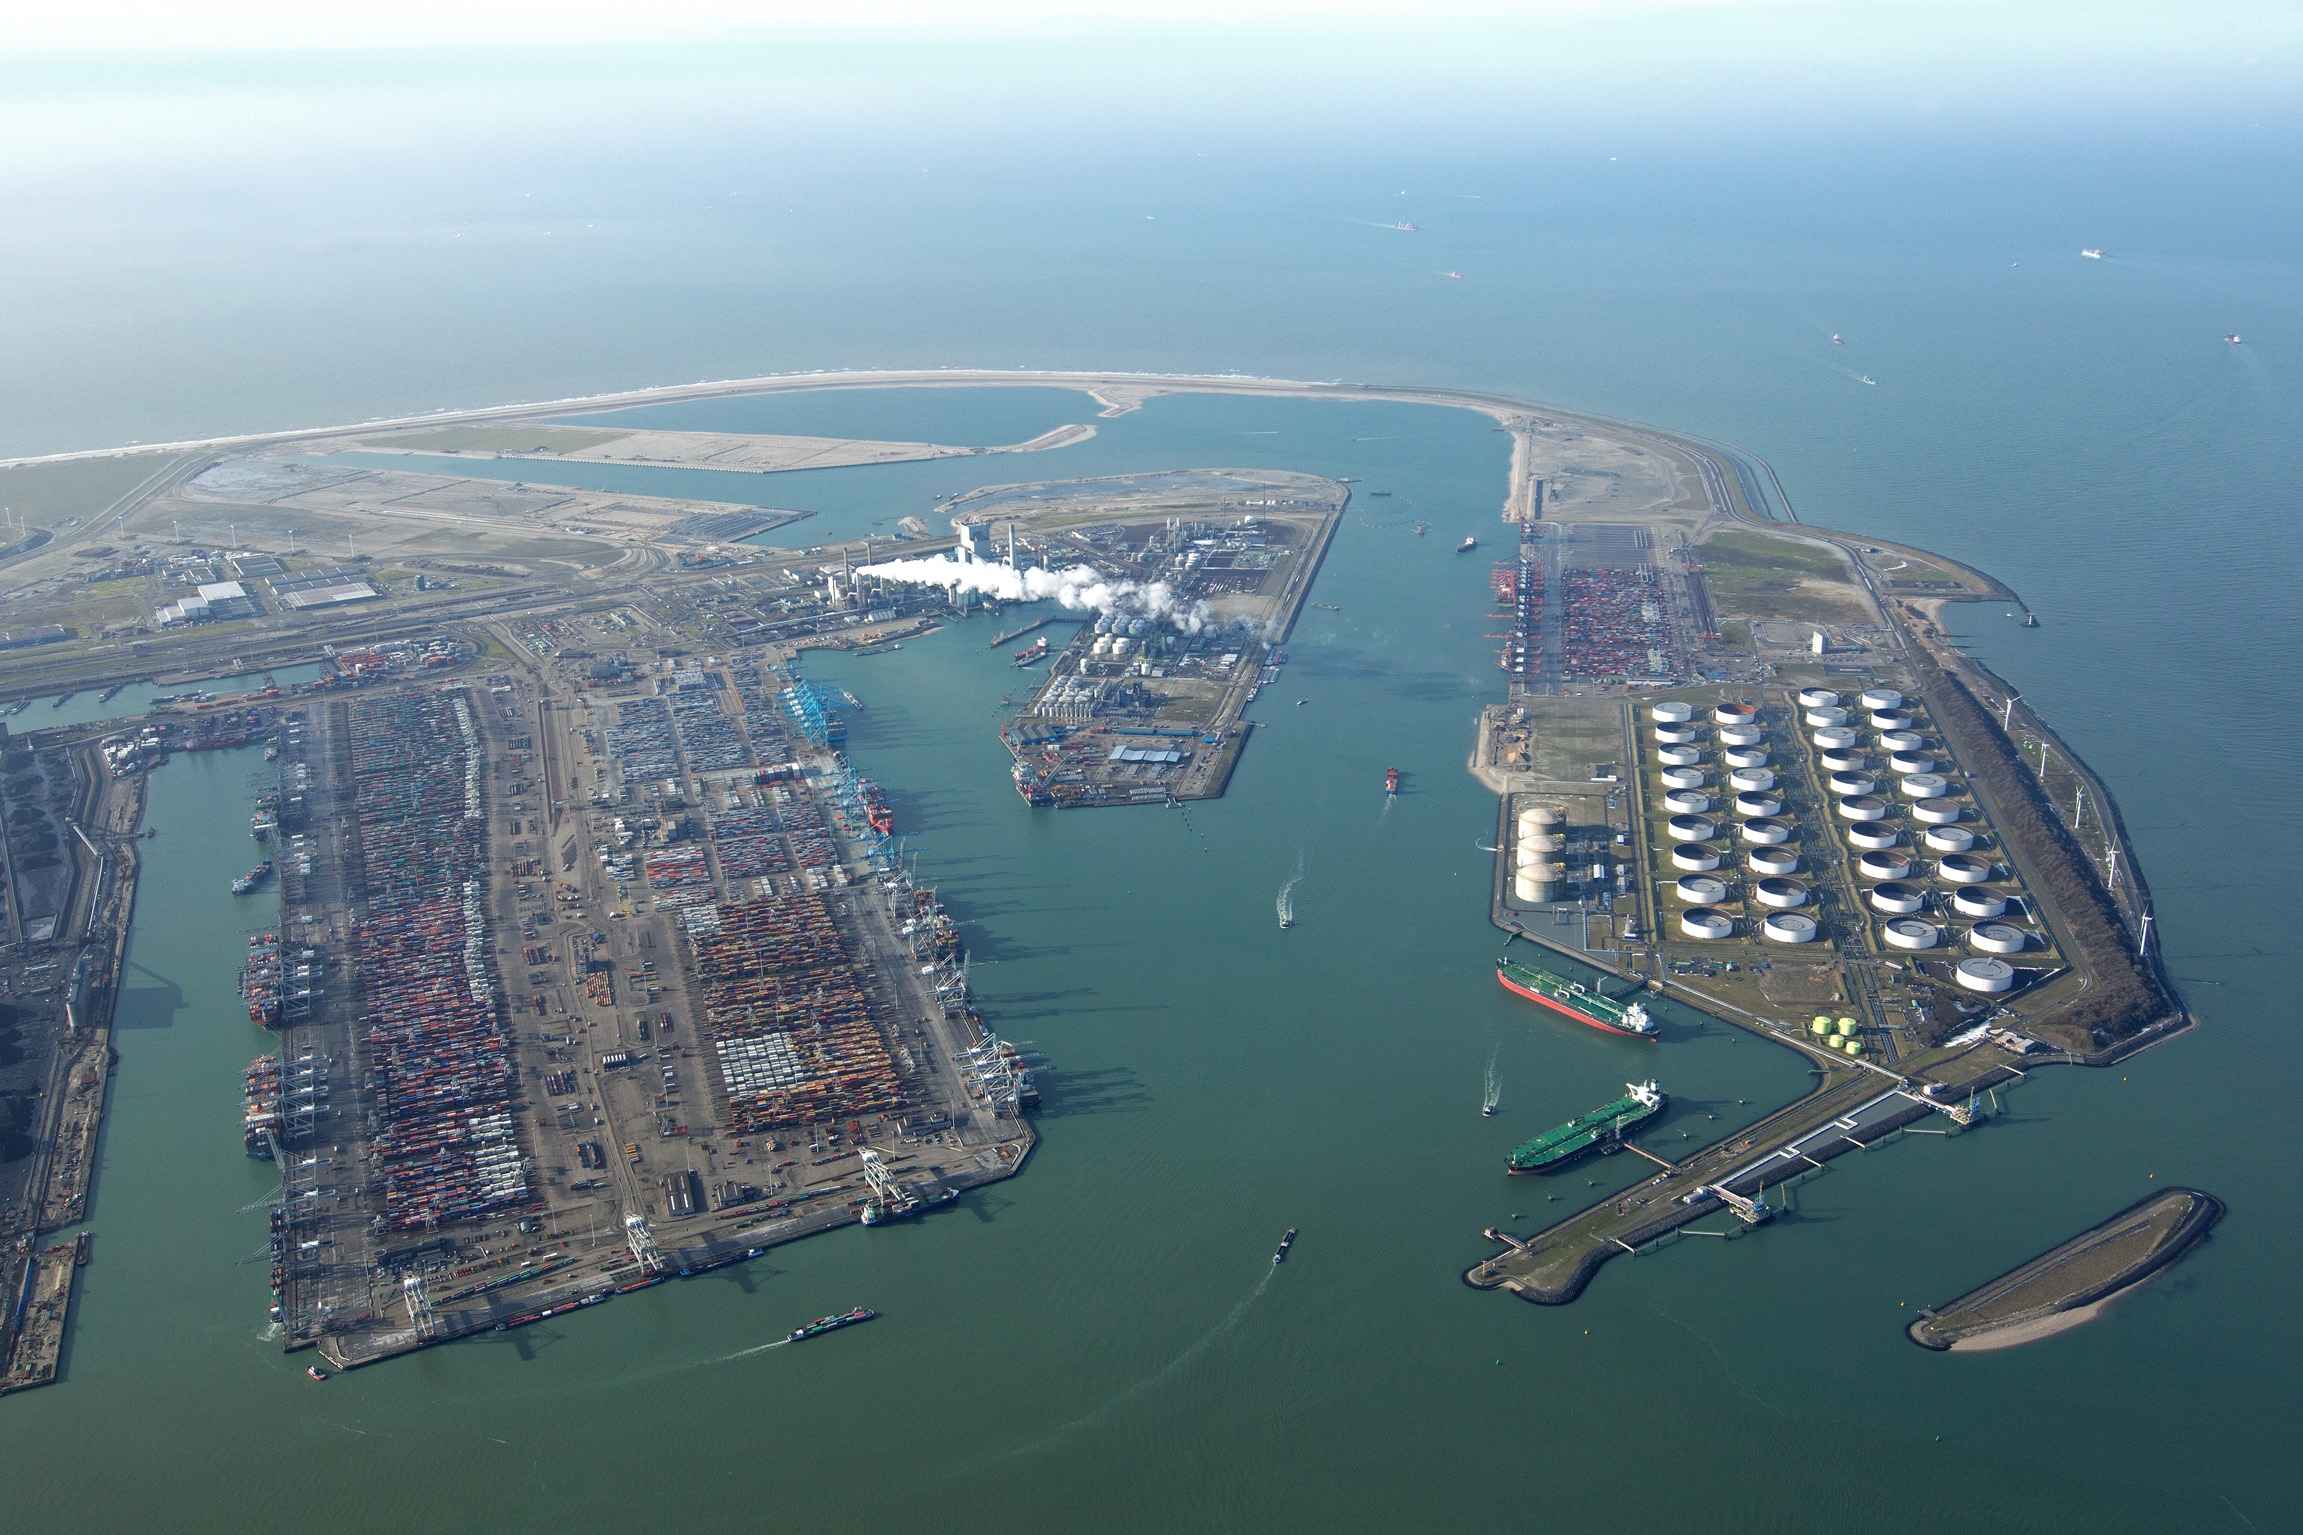 Can Rotterdam become the world's most sustainable port city? - CNN.com